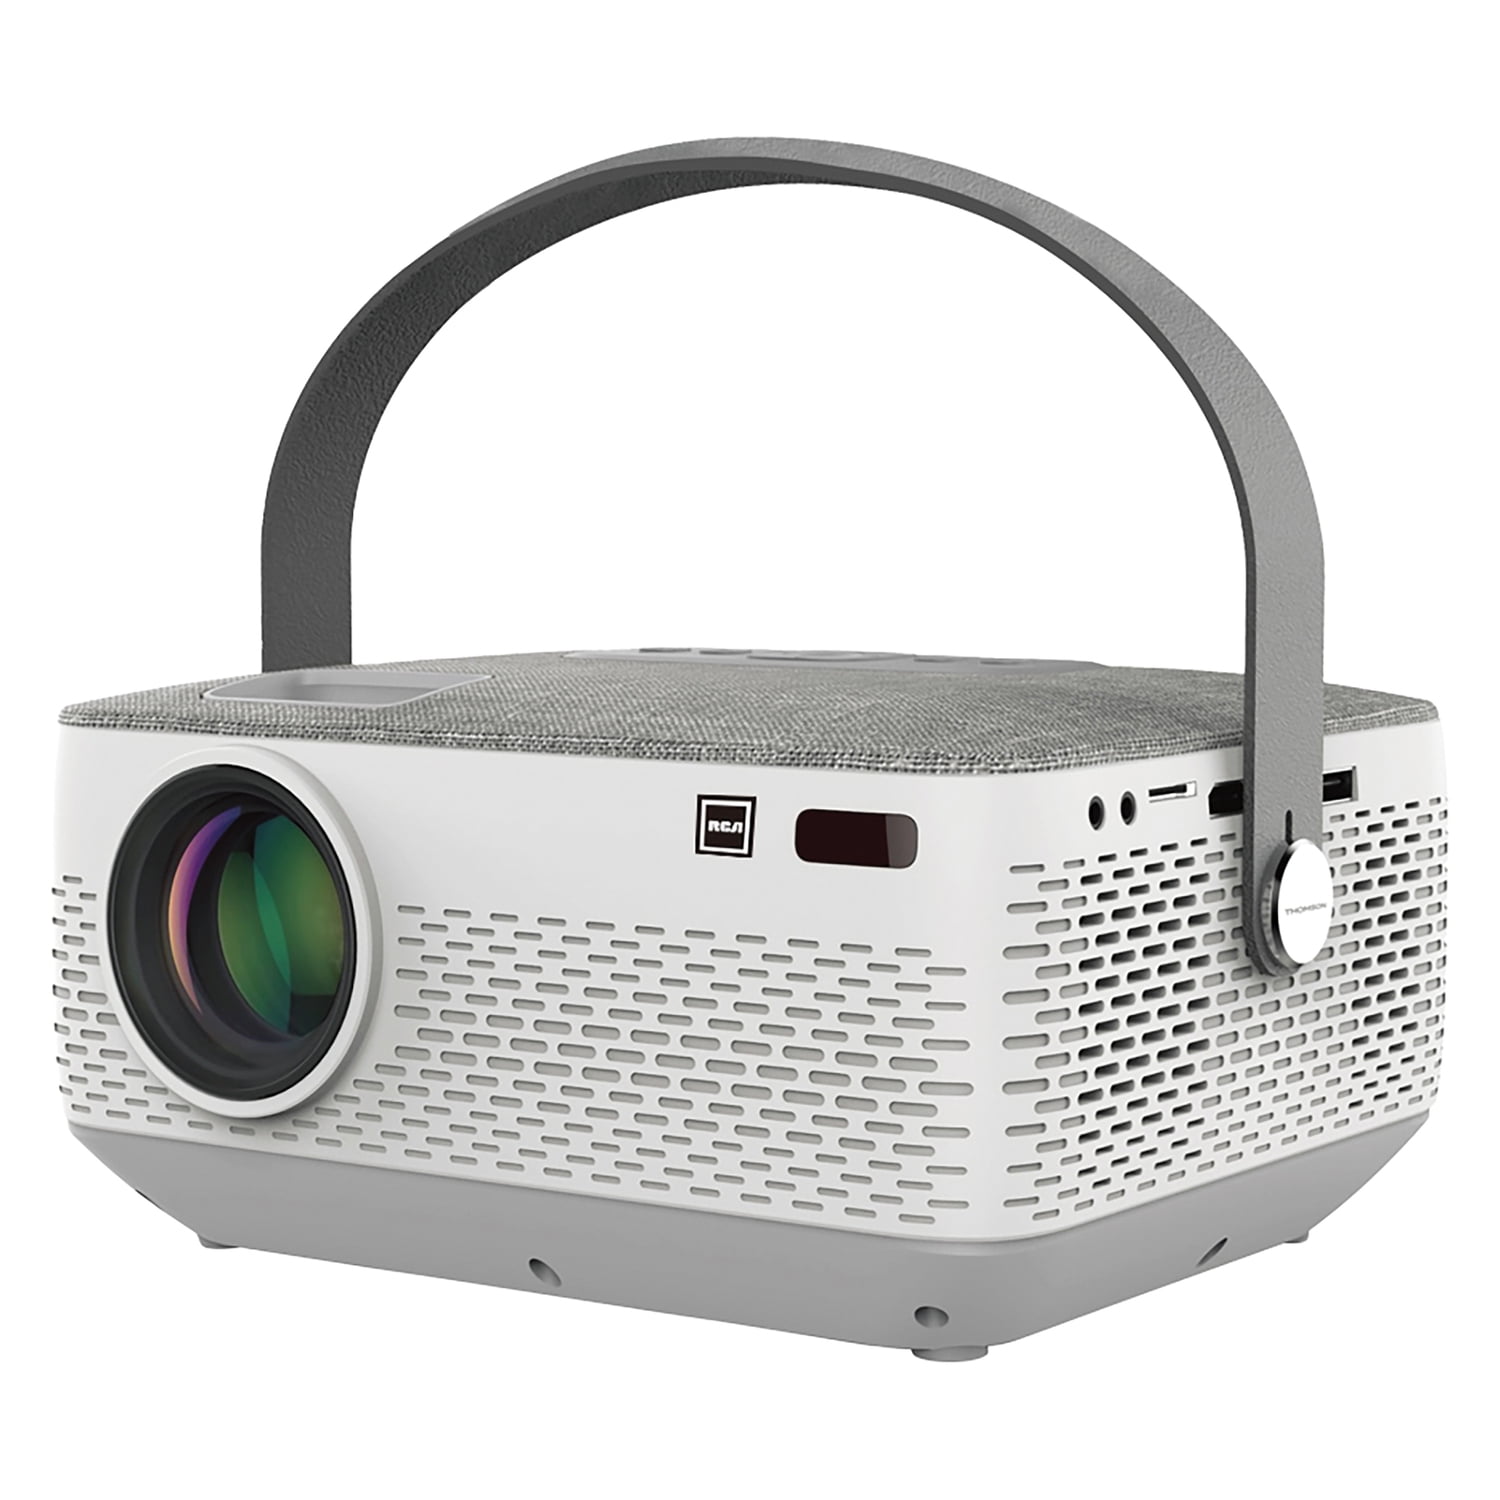 YOTON Projector WiFi Bluetooth 1080P Supported, LCD3.0 Compatible with  PC/Phone Projector 